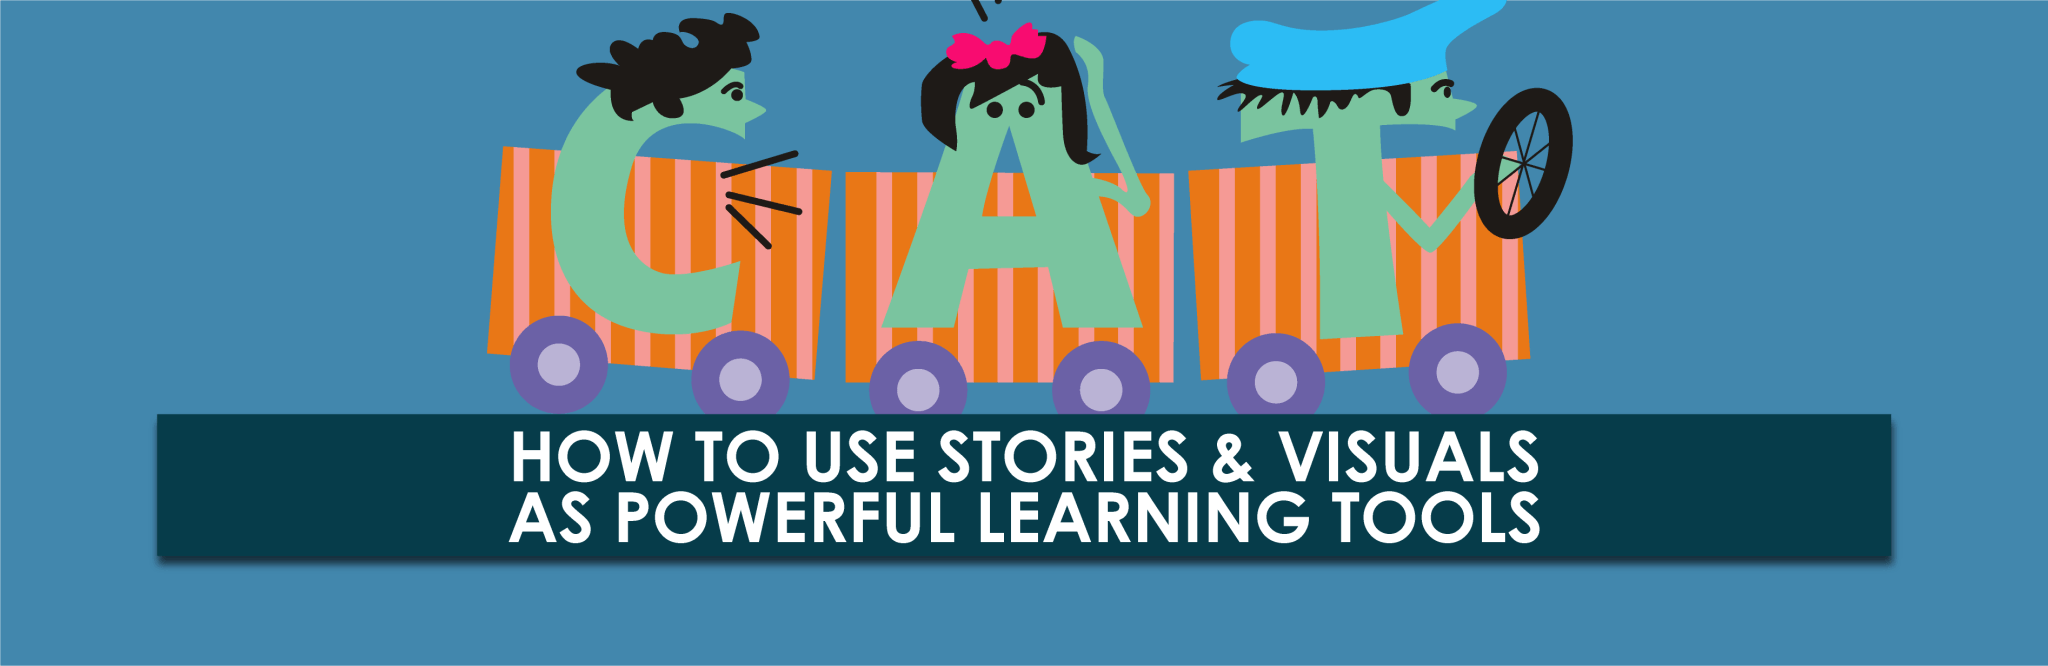 How to Use Stories & Visuals as Powerful Learning Tools